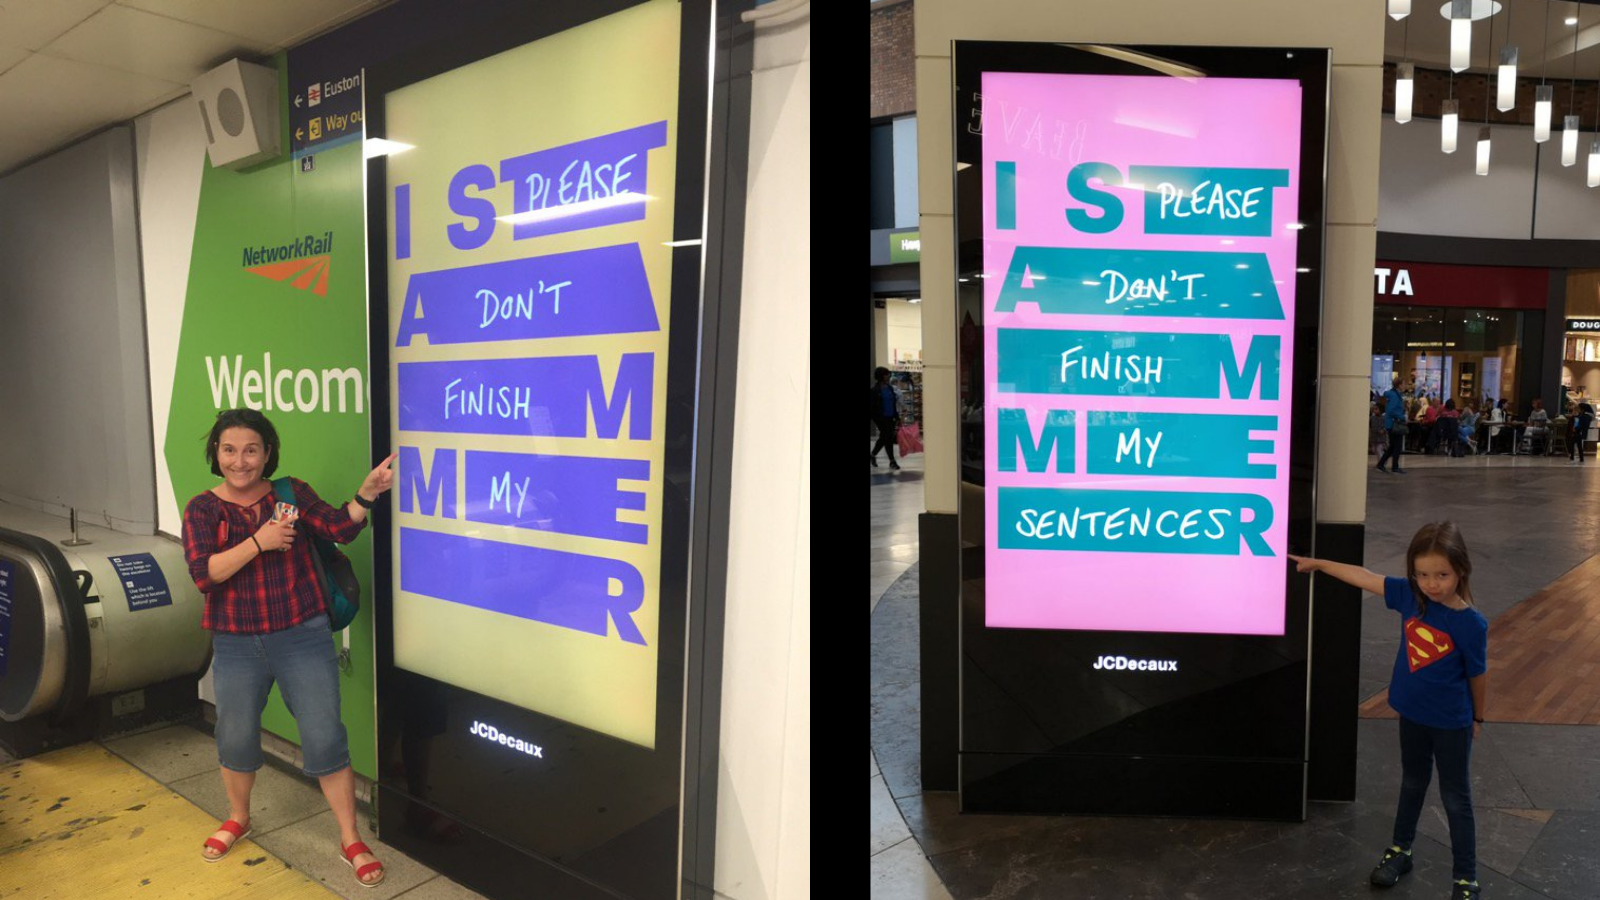 Two images showing electronic billboards with people pointing at them